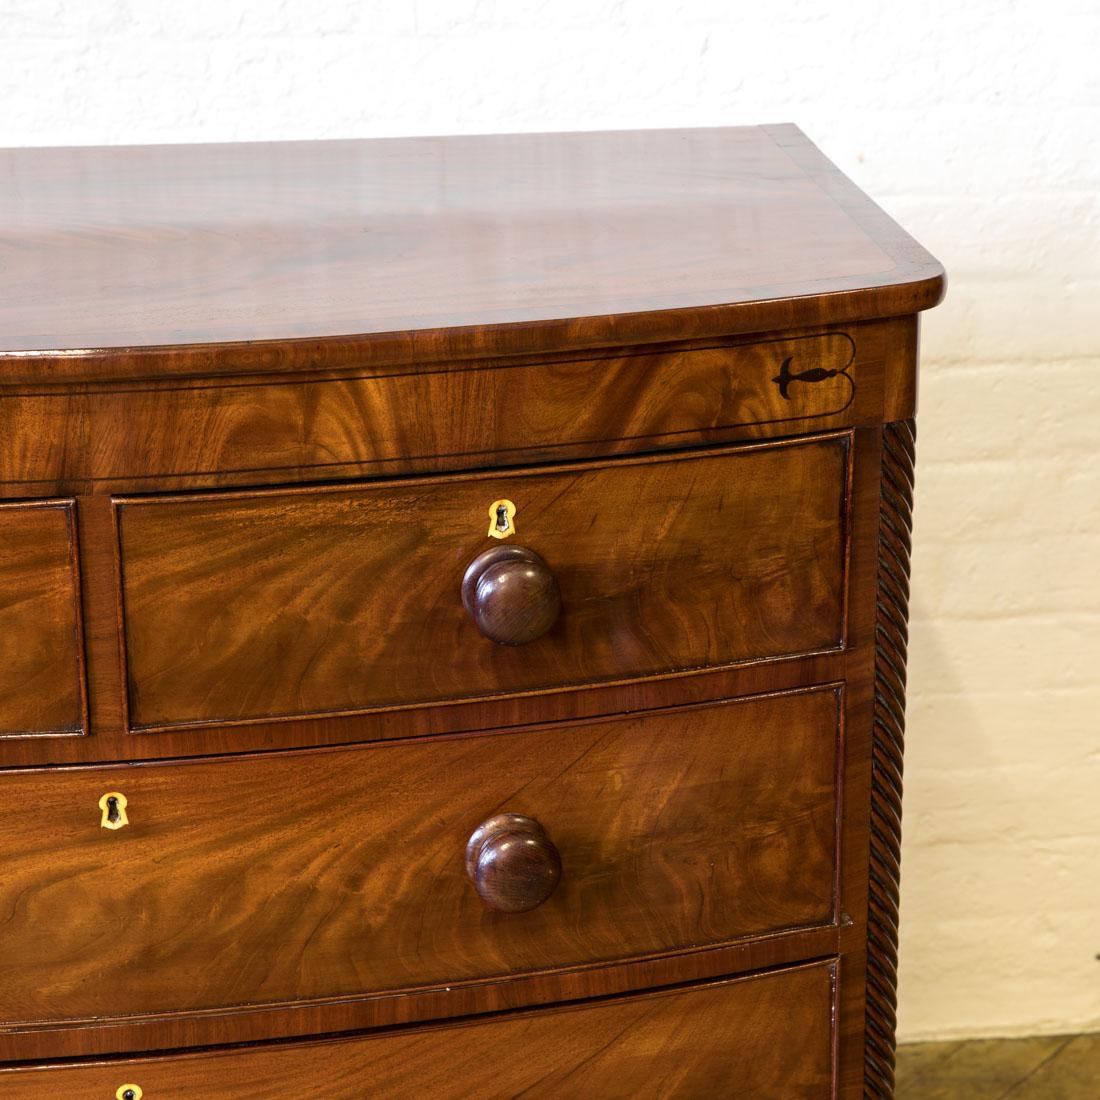 A very attractive Regency bow fronted chest of drawers, circa 1810. With elegant splayed feet below three under drawers, all with their original turned knobs. The rope twist corners are typical of the period as is the ebony inlay to the frieze and